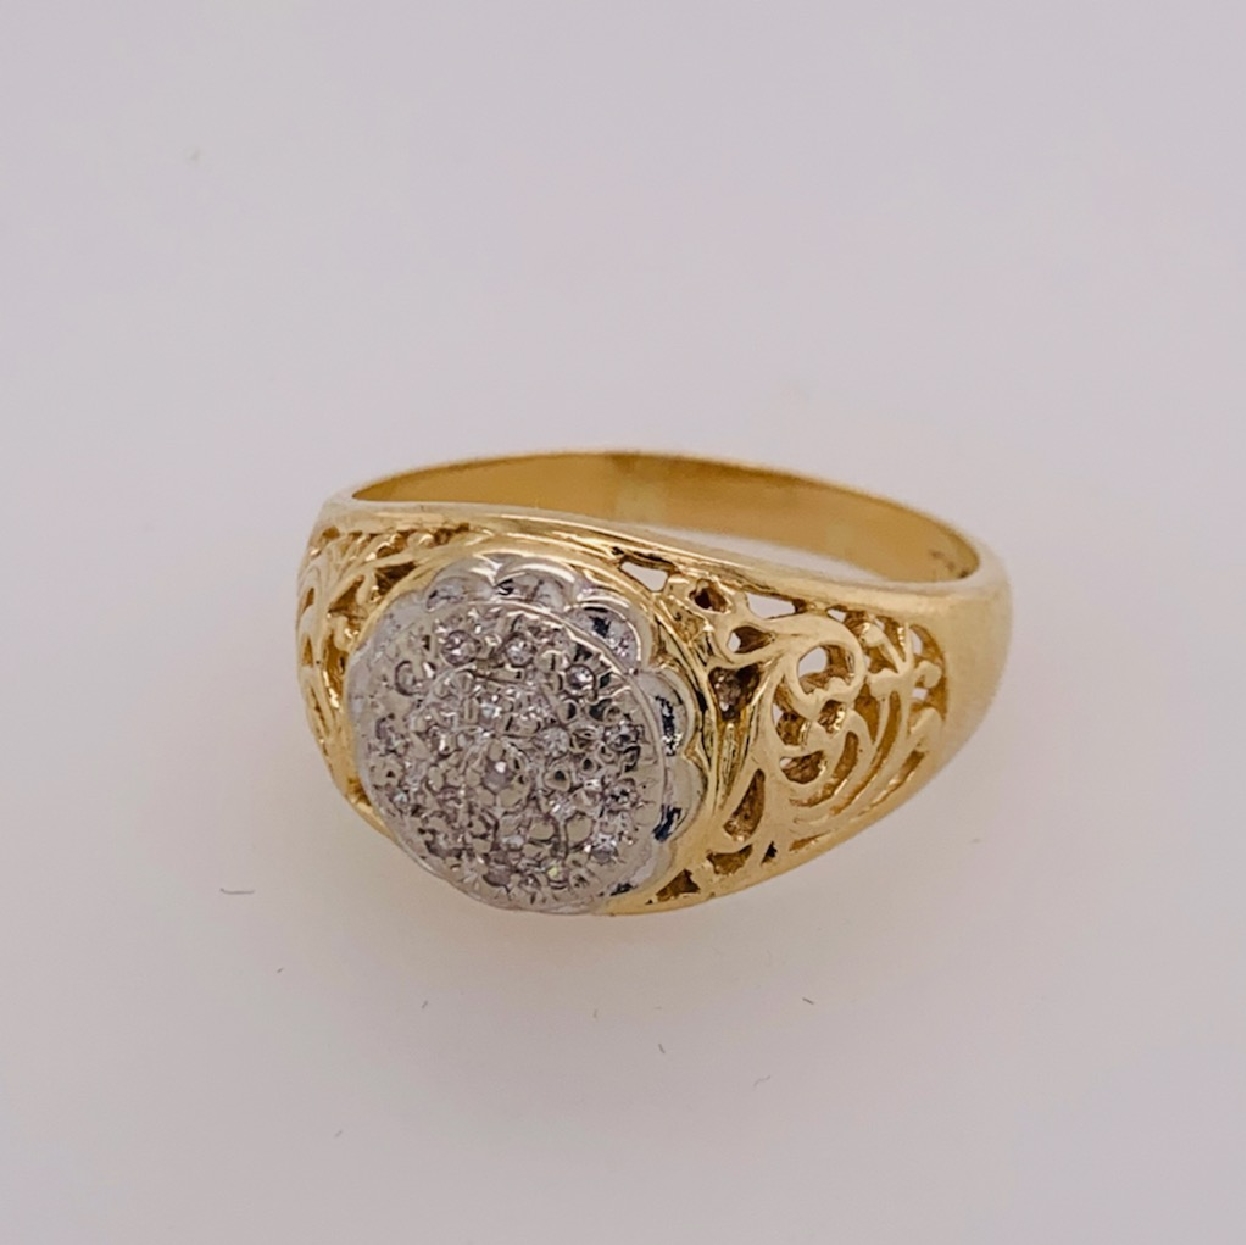 14K Yellow Gold Diamond Cluster Ring with Filigree Details Size 12